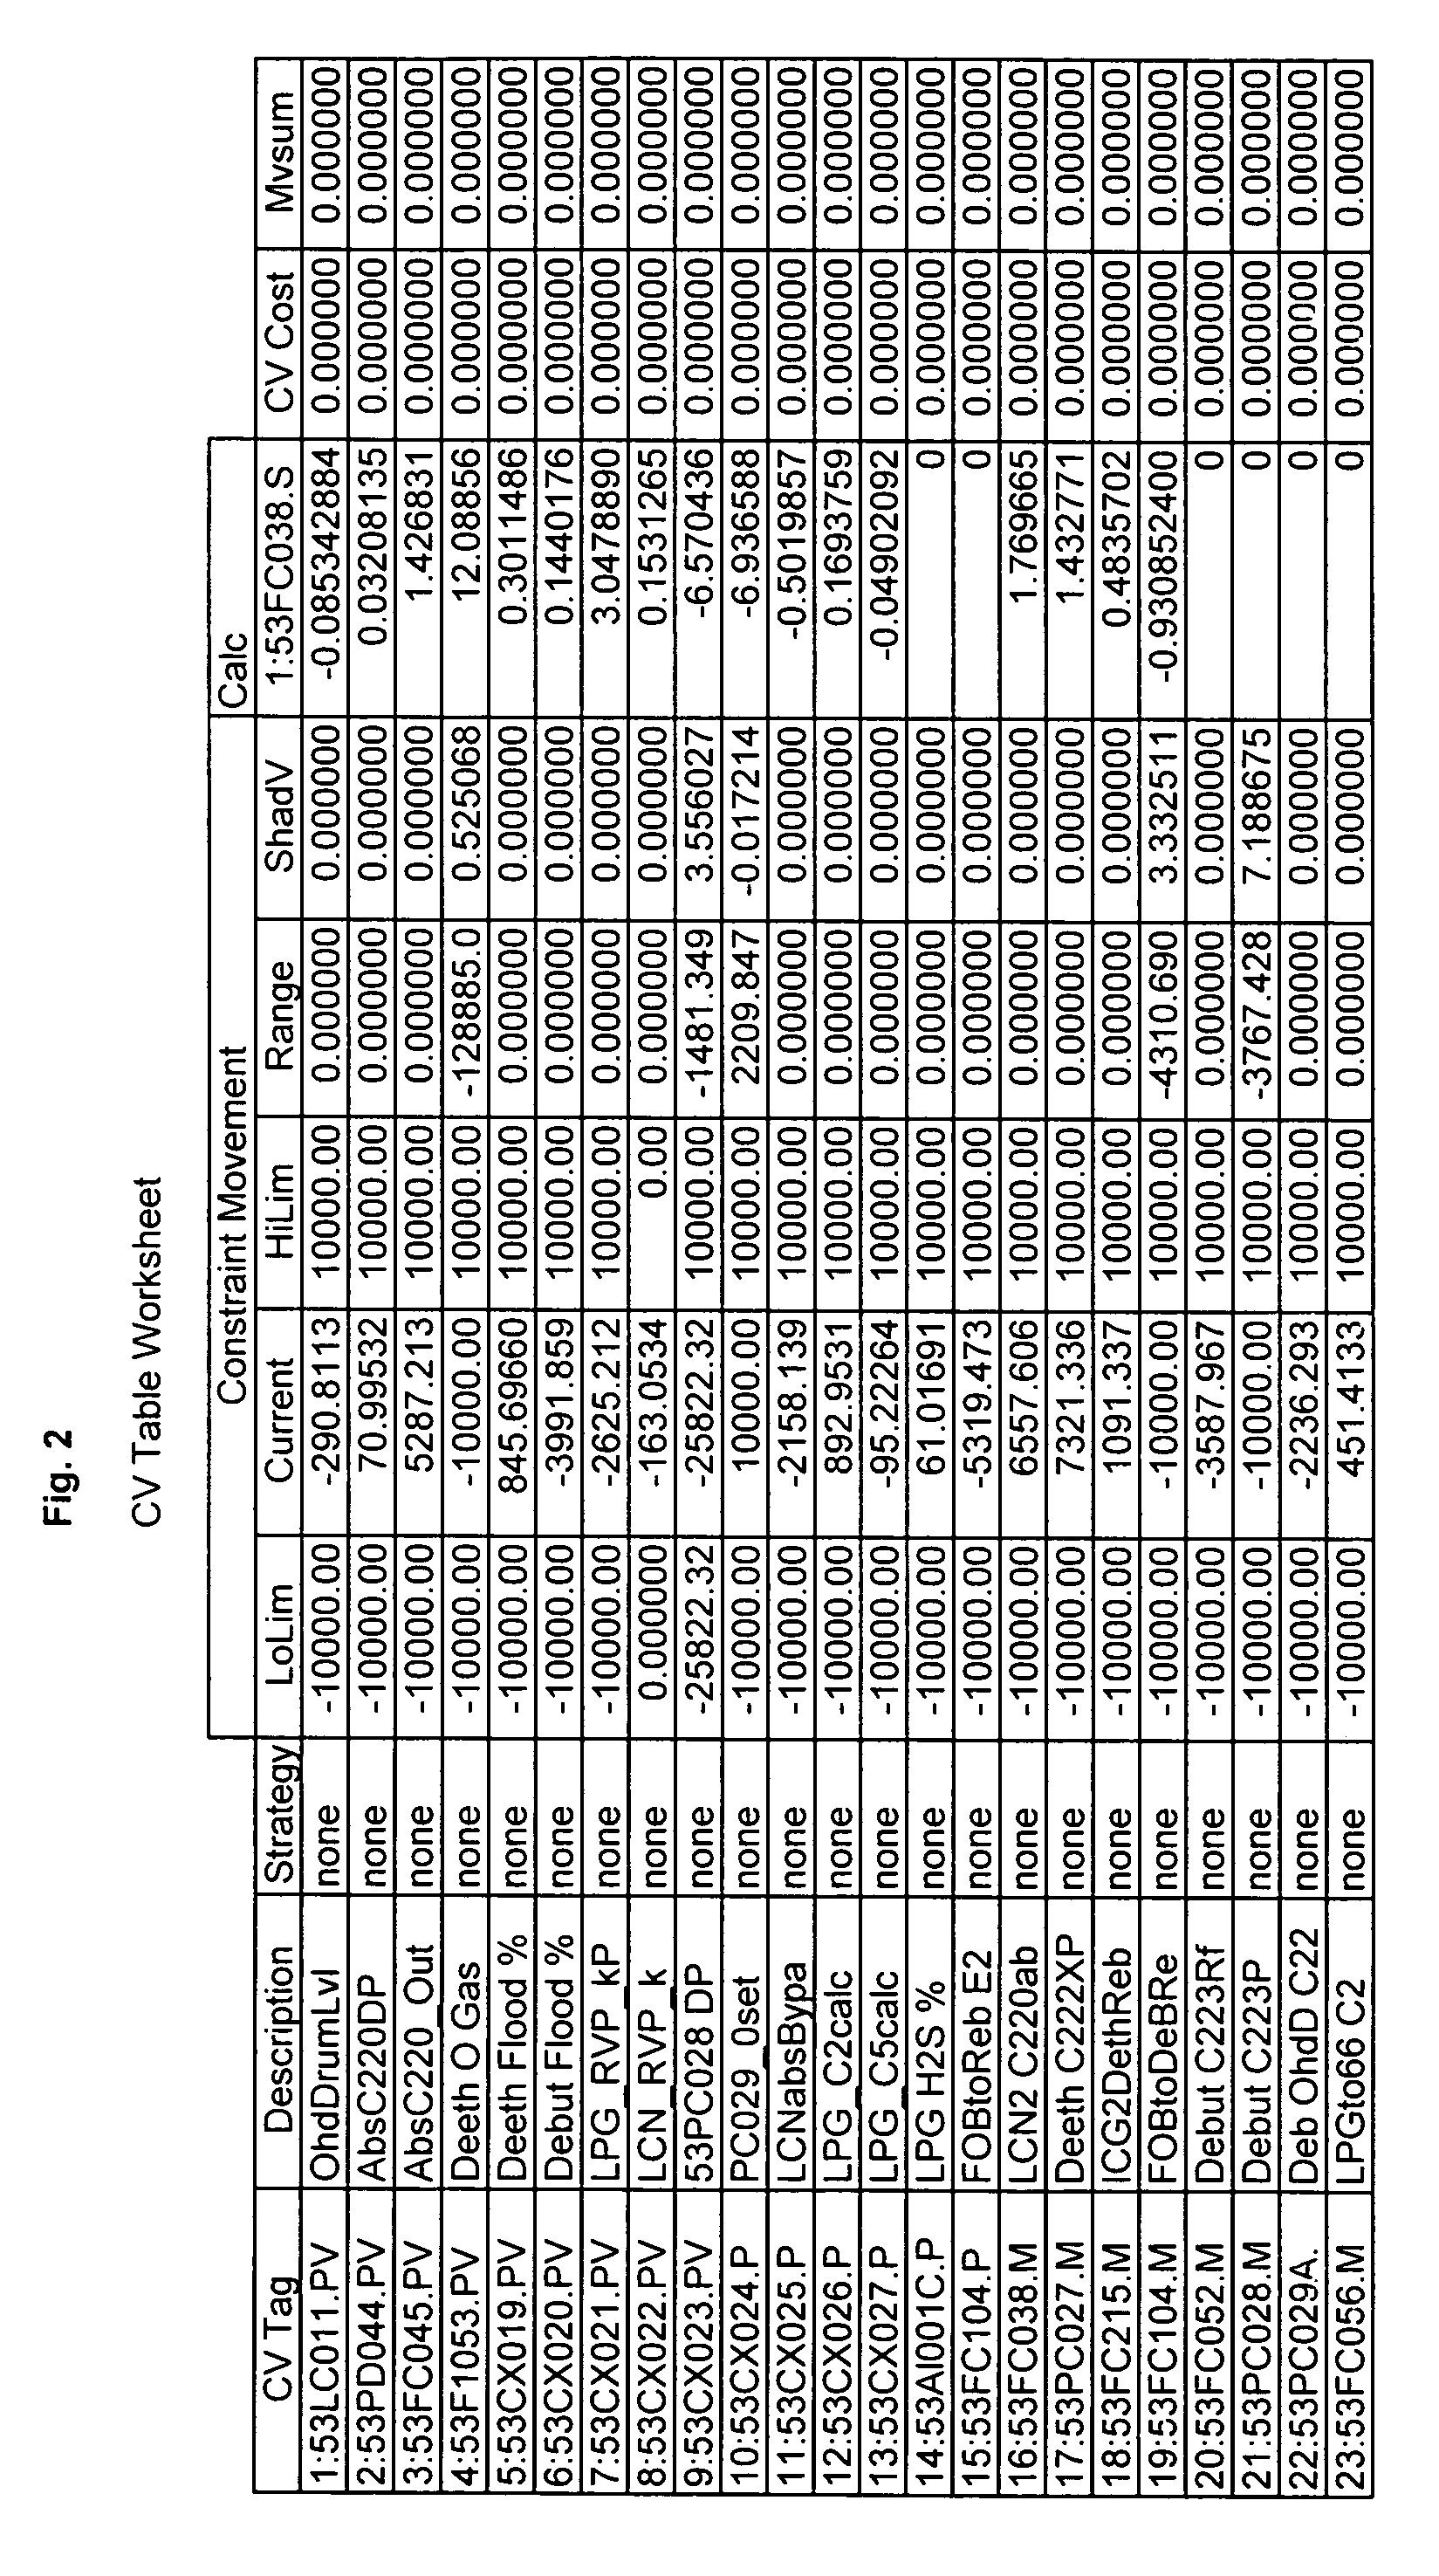 System, method and program for dynamic control and optimization of a process having manipulated and controlled variables